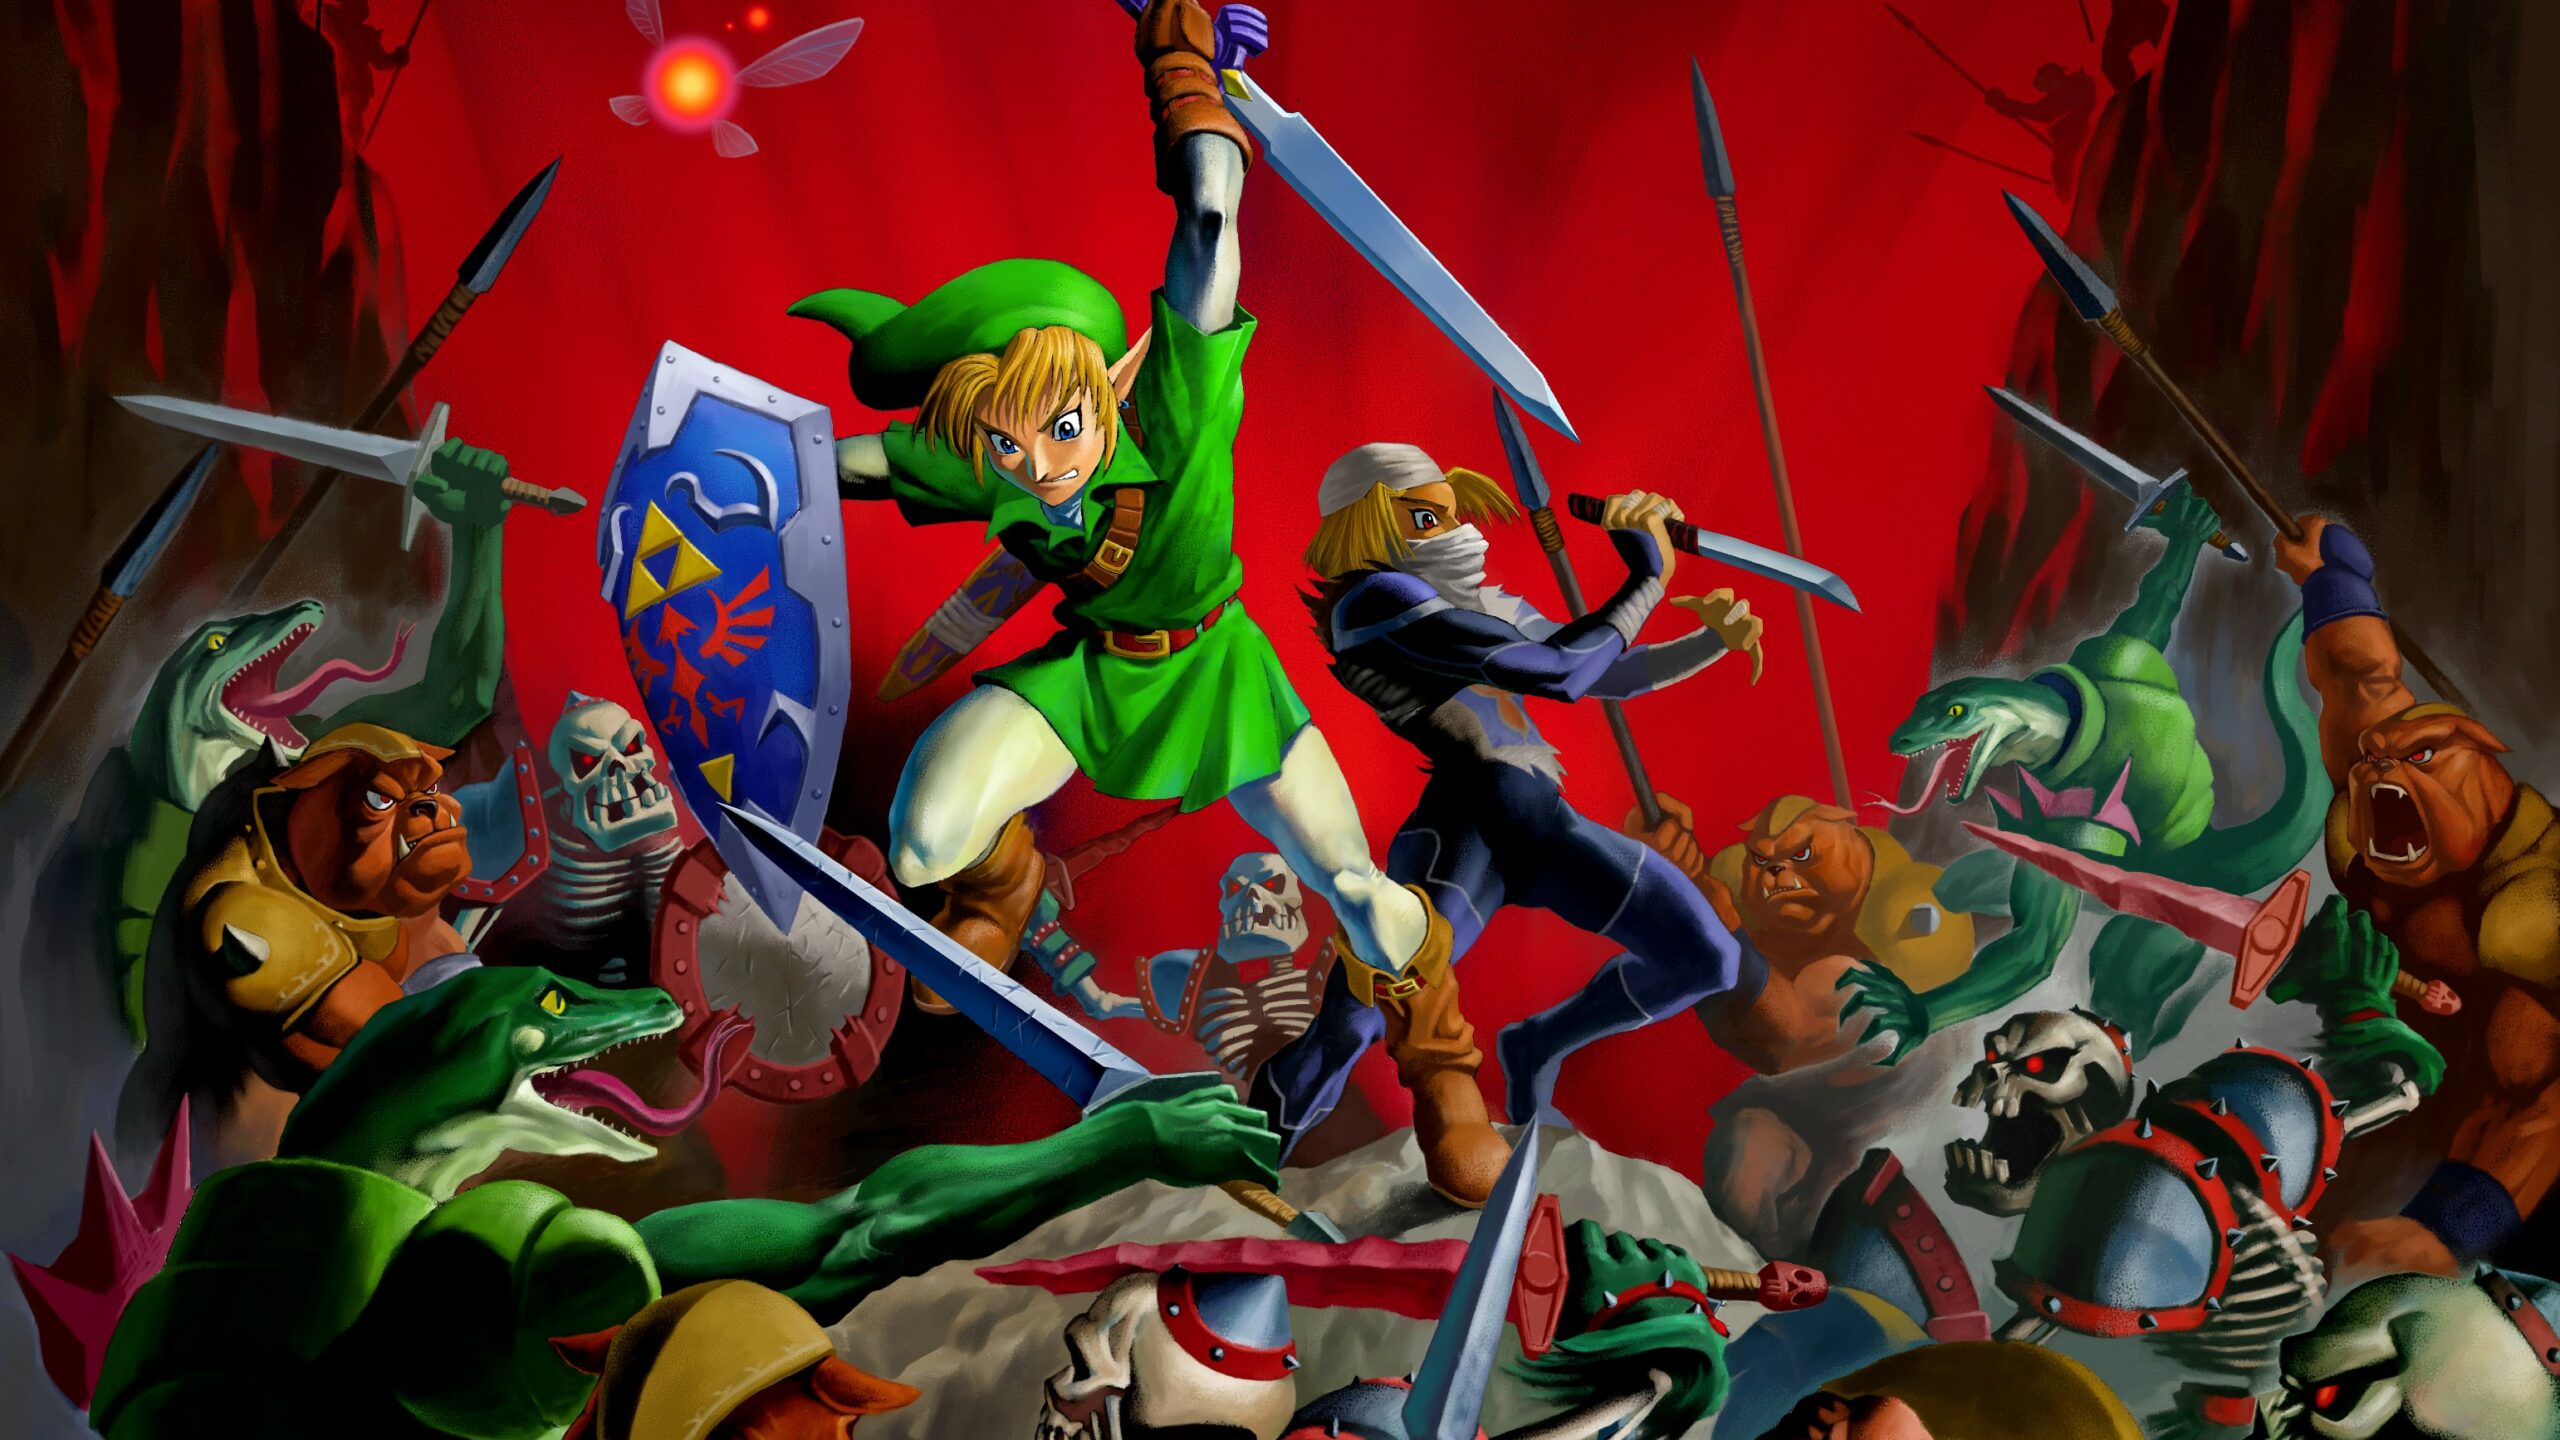 Update: Another Unofficial Ocarina of Time PC Port is Now